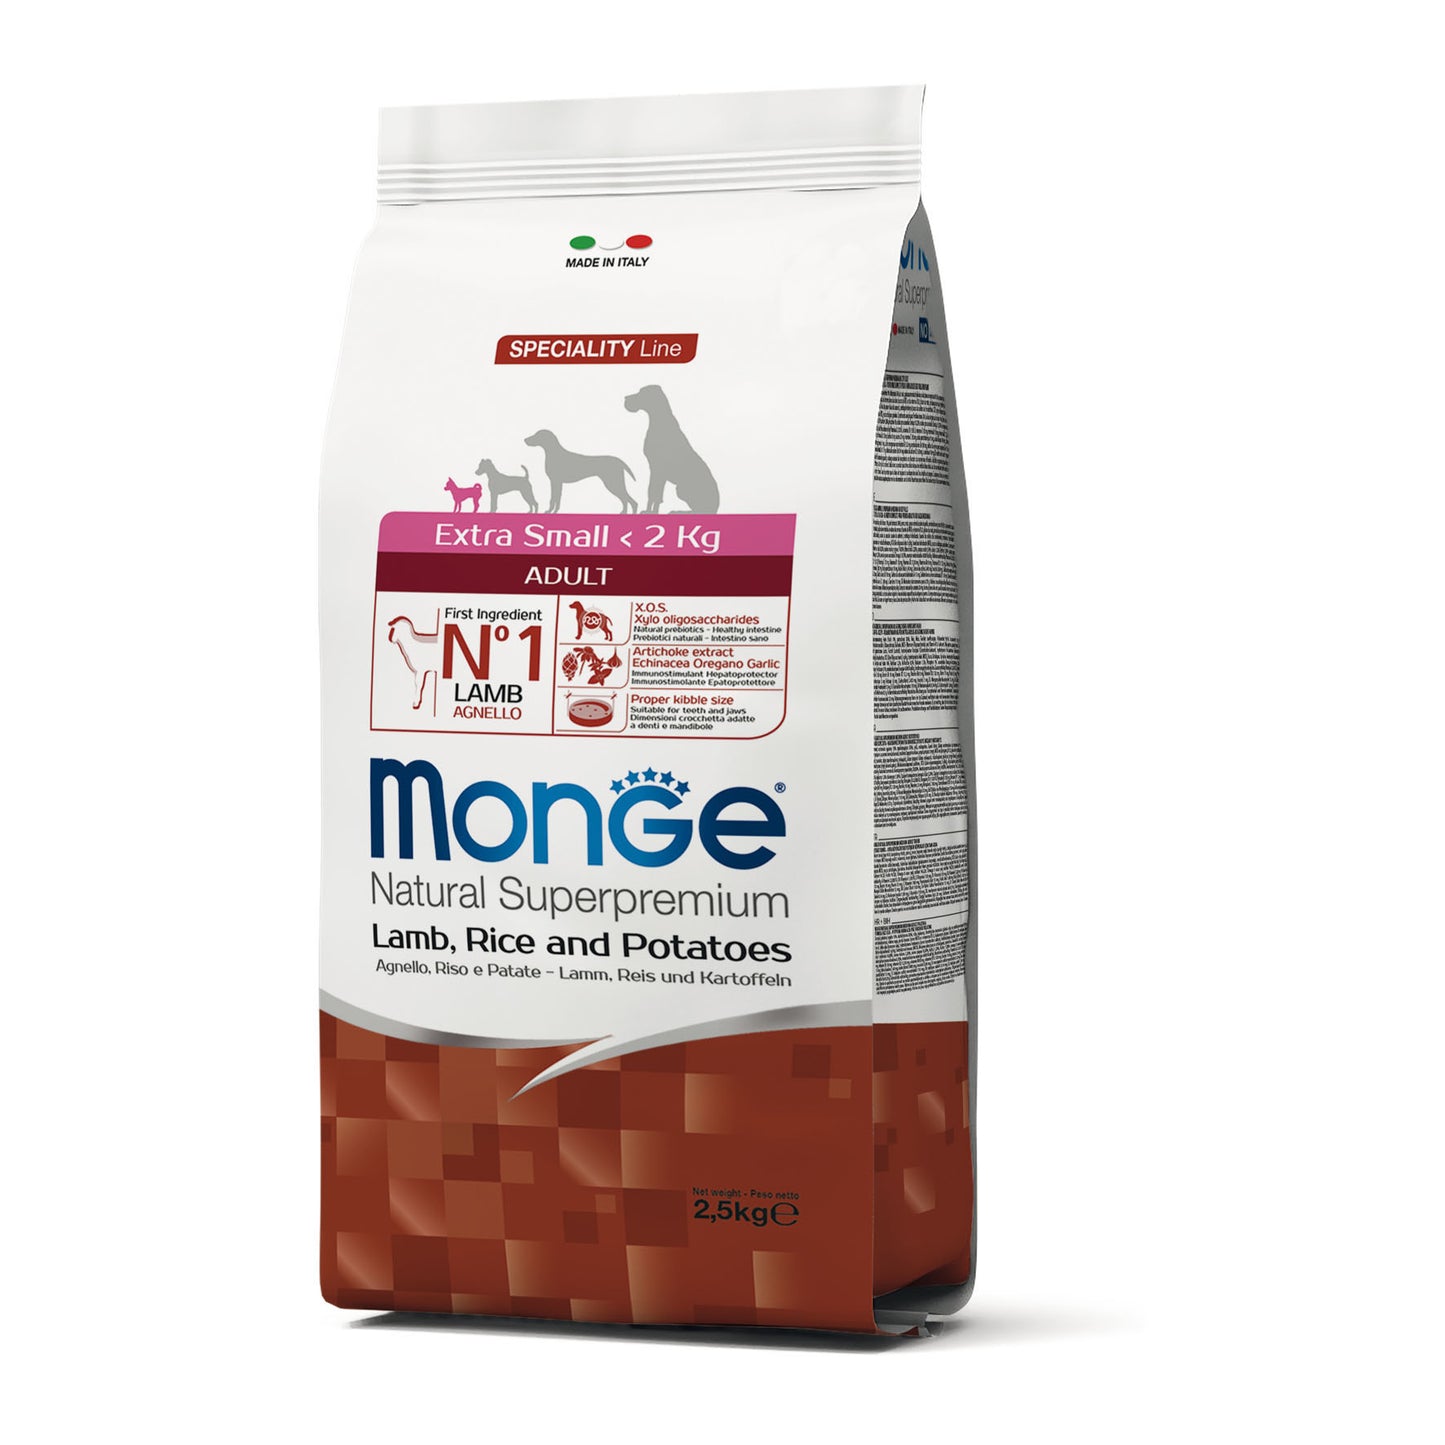 Monge Dog - SPECIALITY Line - Monoprotein - Adult Extra Small Lamb